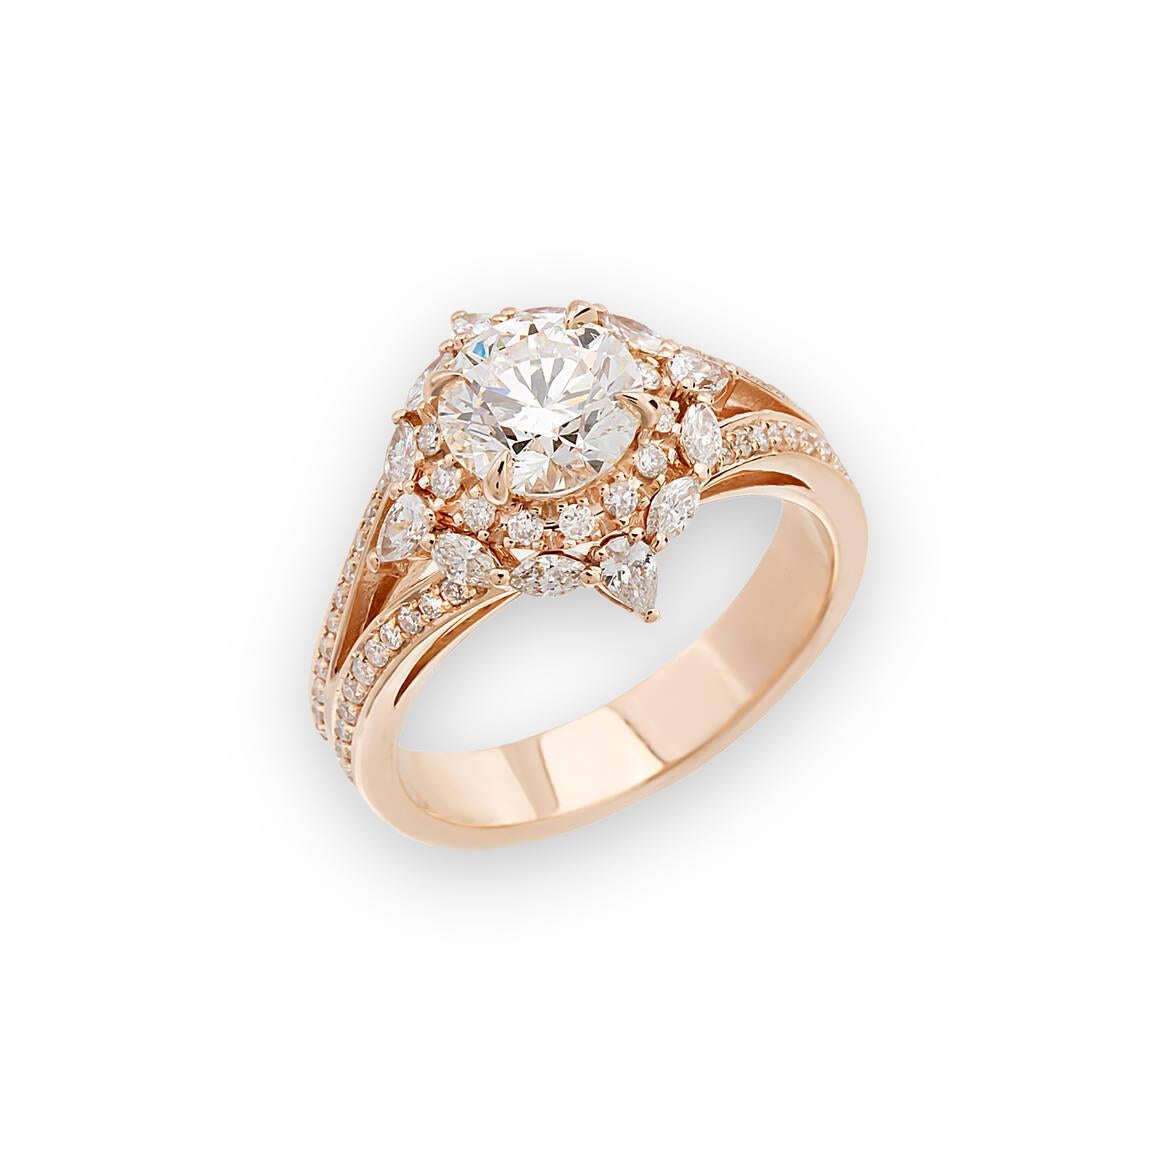 For Sale:  2.20 Carat Round, Pear and Marquise Cut Diamond 18K Rose Gold Ring 2